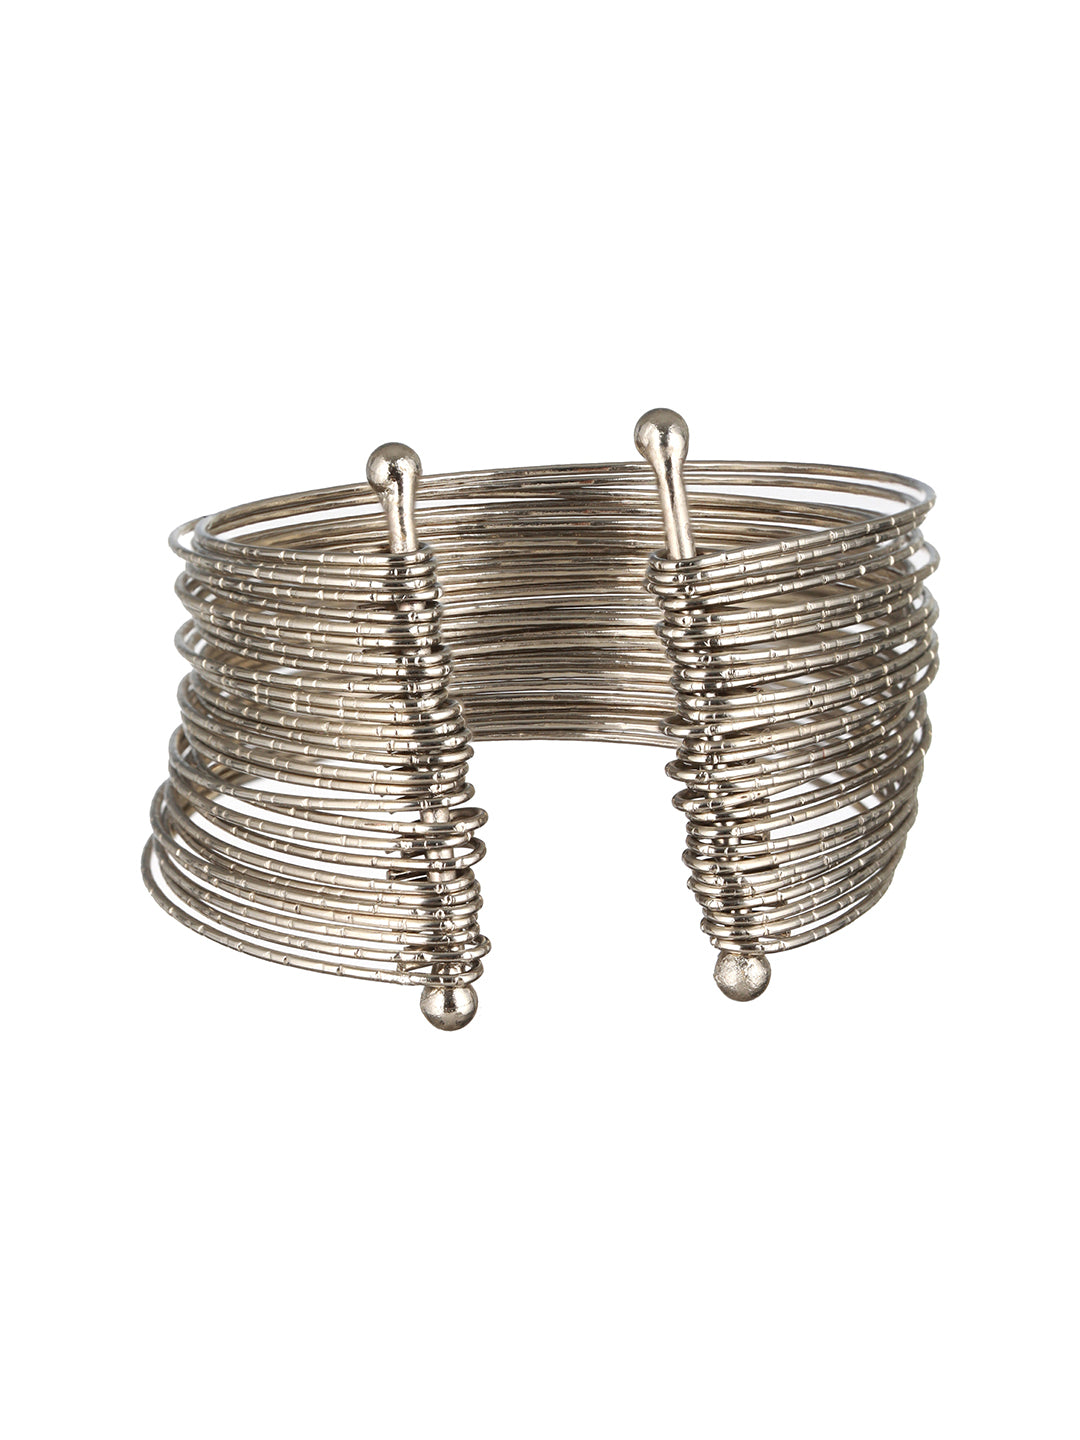 Priyaasi Multistring Textured Solid Silver-Plated Cuff Bracelet